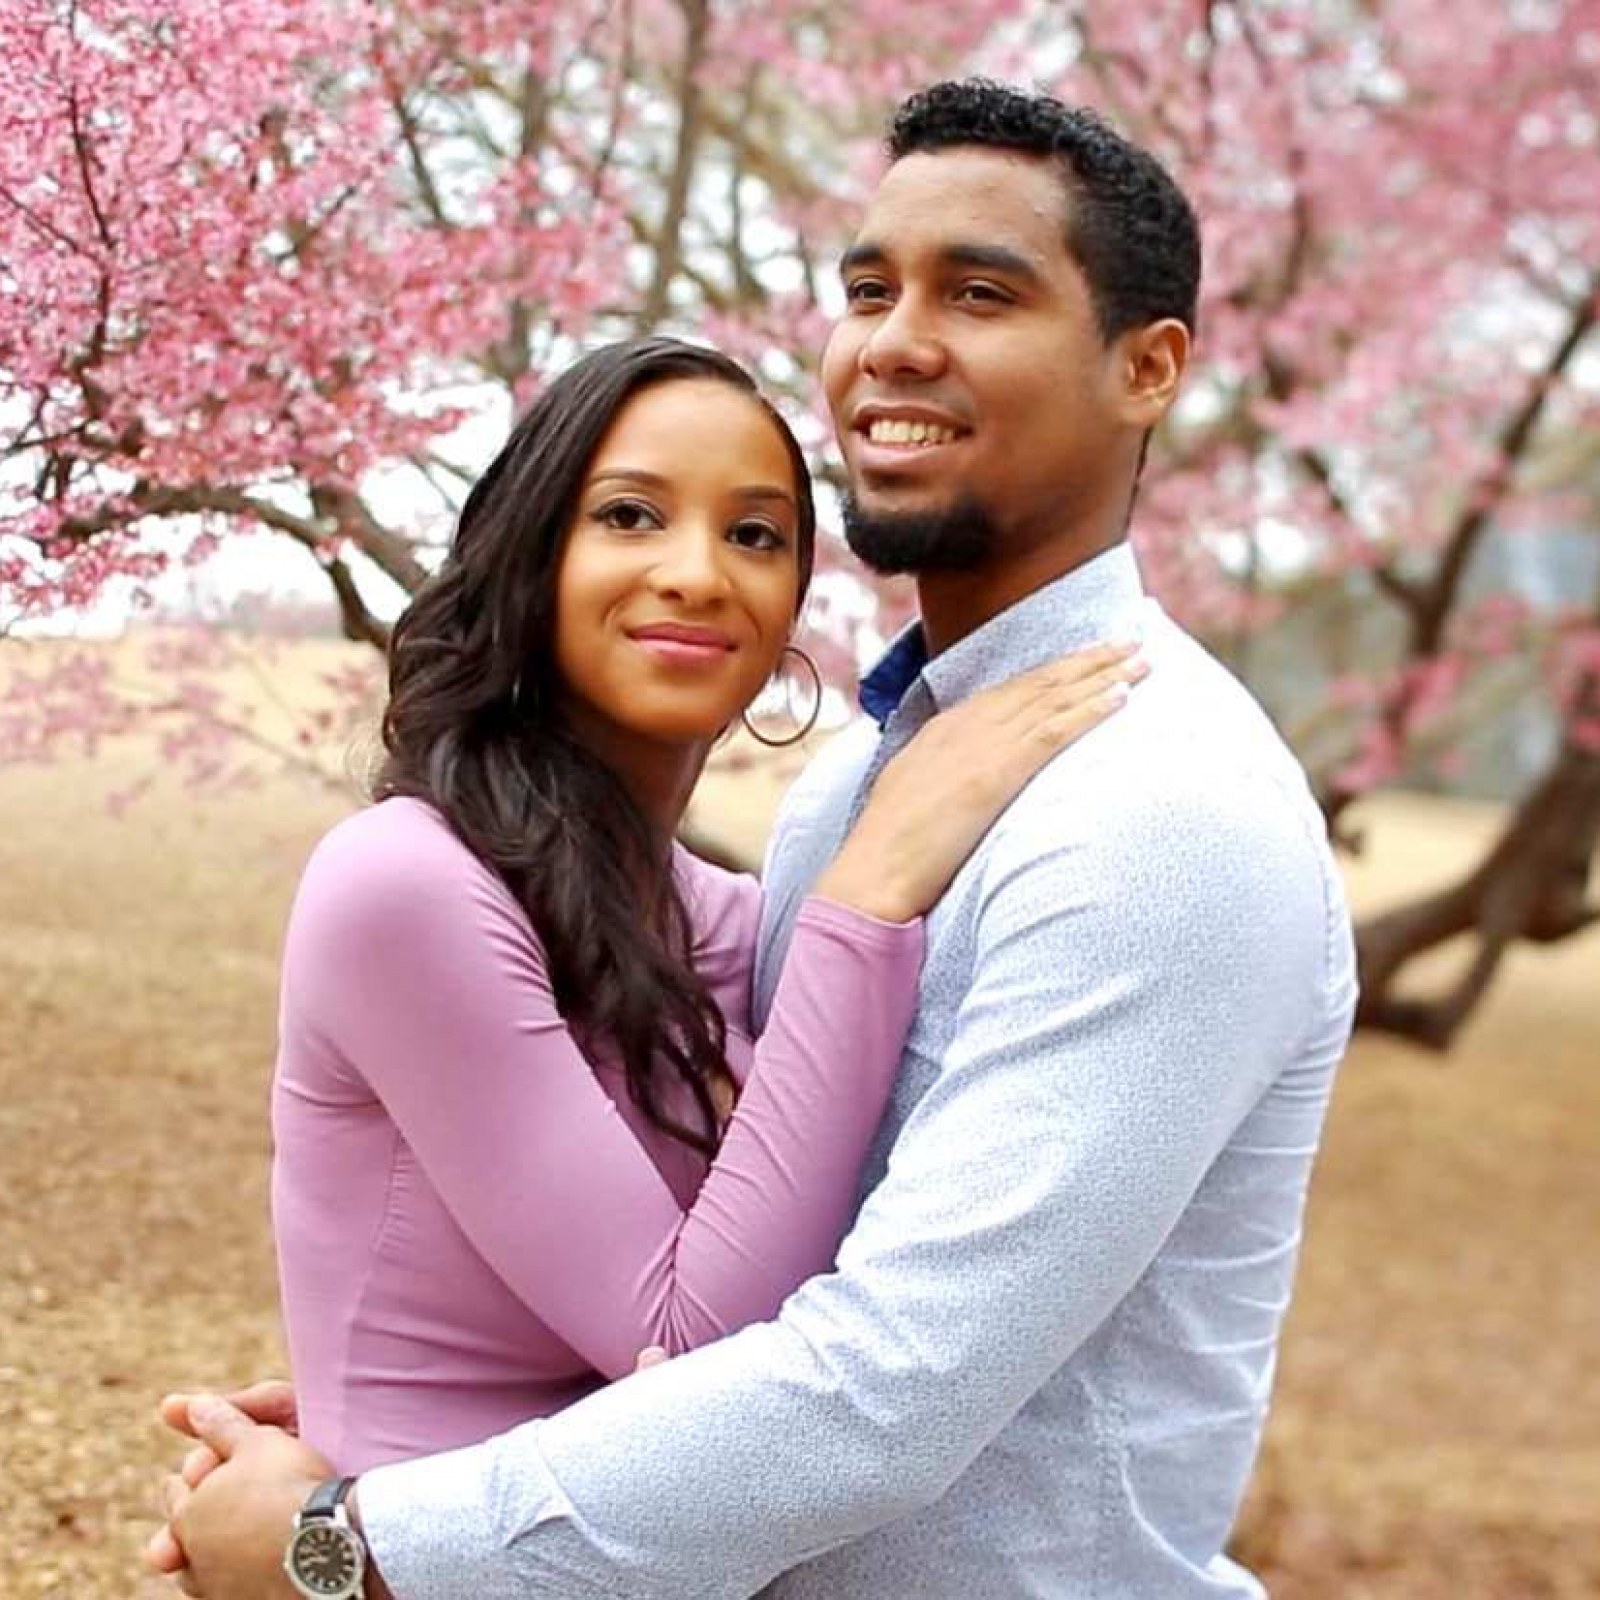 Proof and Pedro Aren't Together? Day Fiancé' Star Posts Cryptic